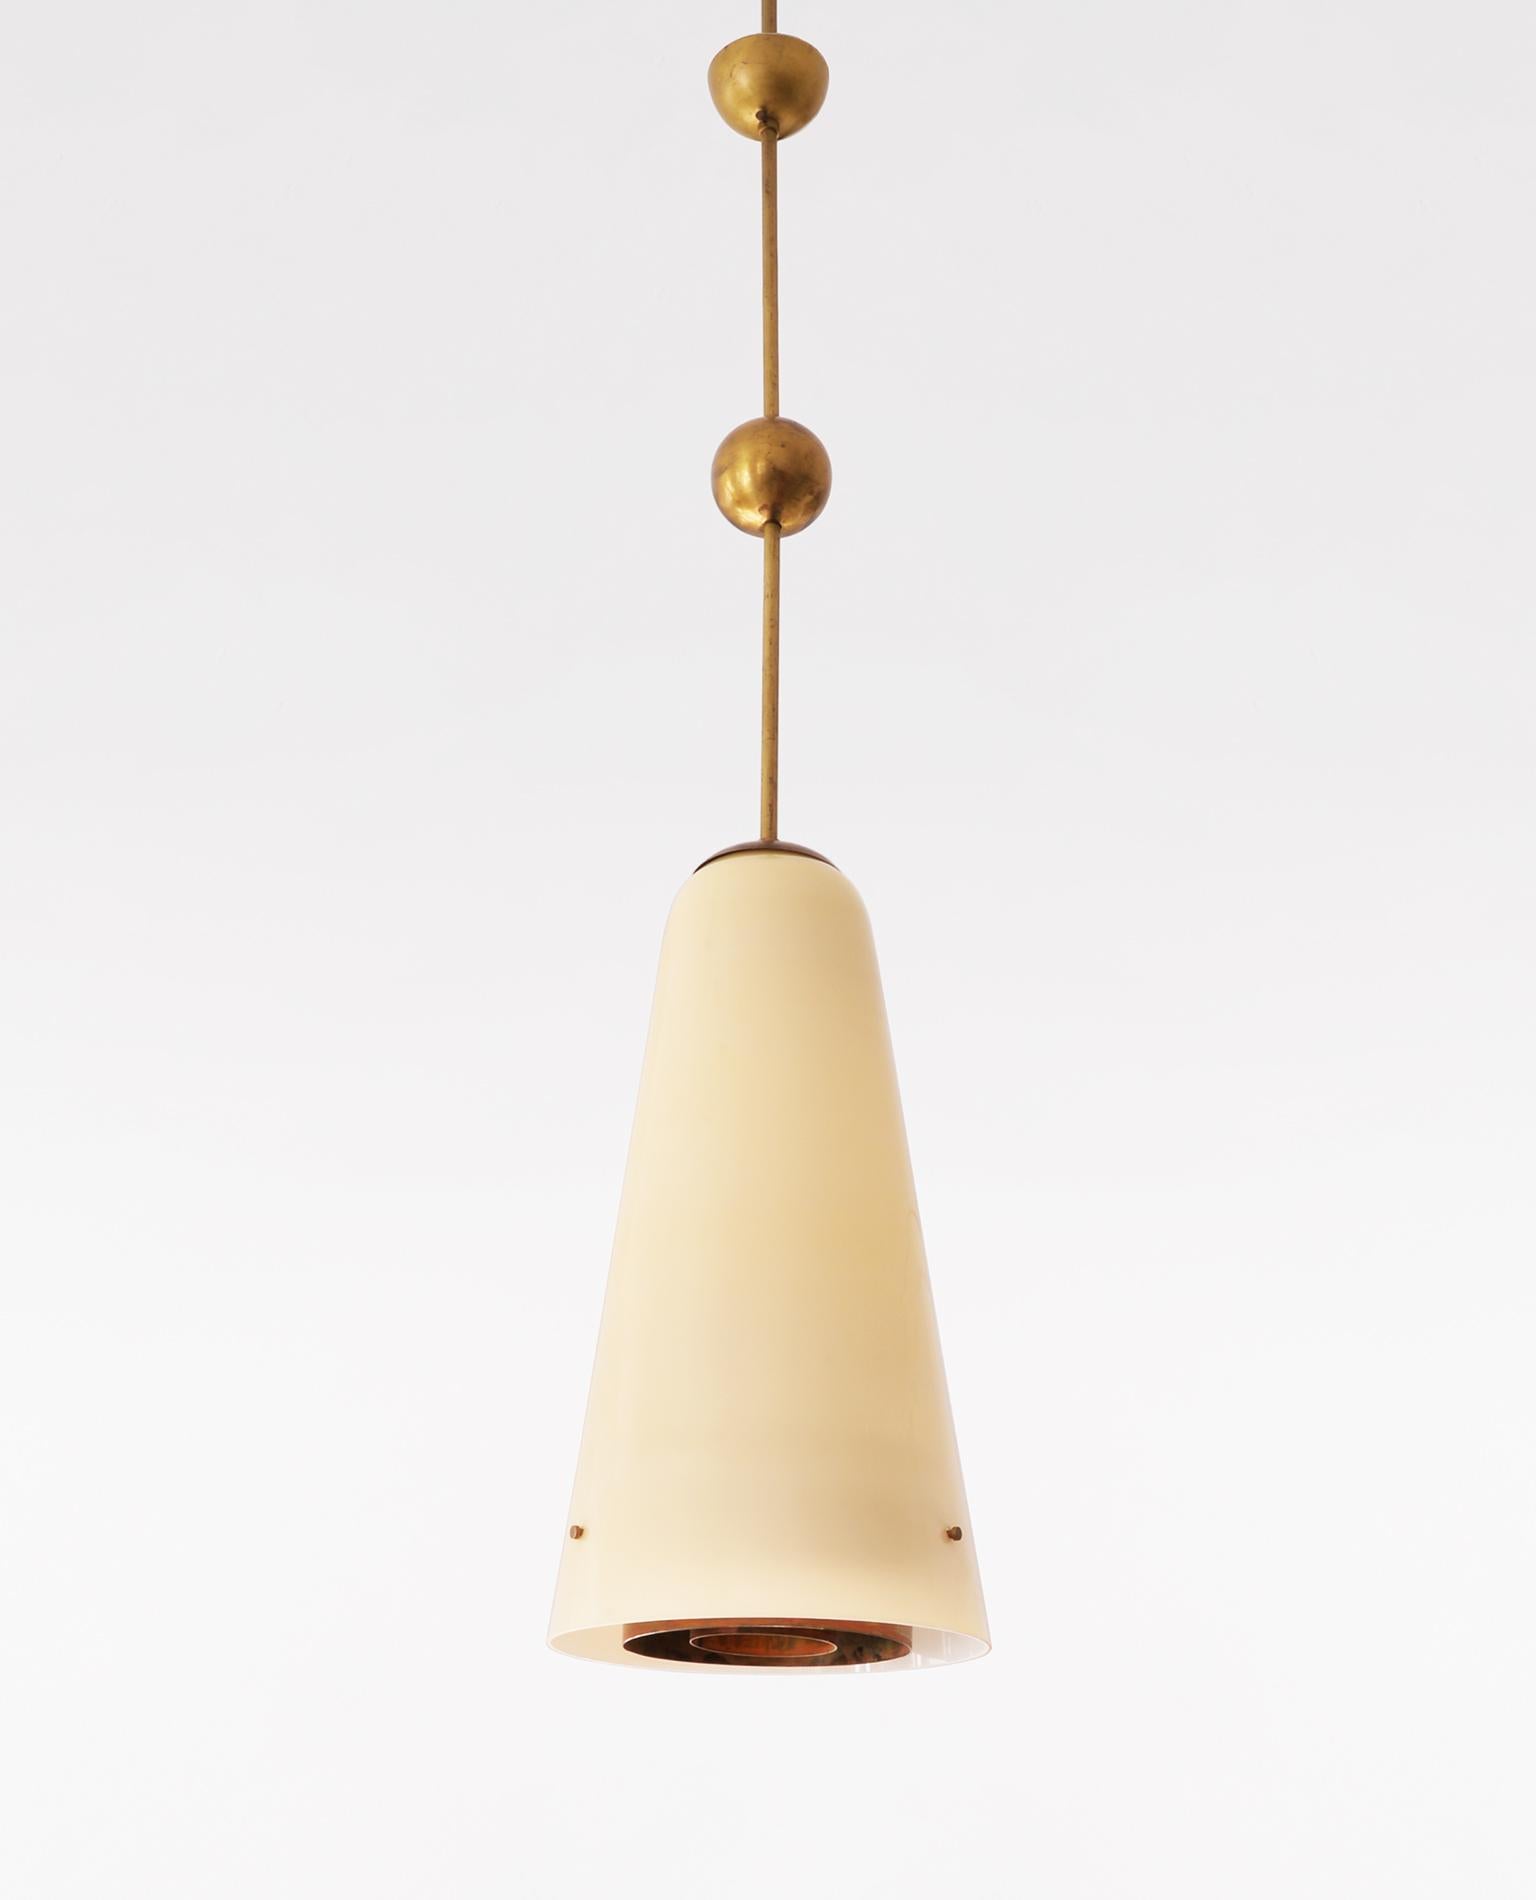 Finnish Ceiling Light by Paavo Tynell Manufactured by Taito Oy, Finland c. 1950 For Sale